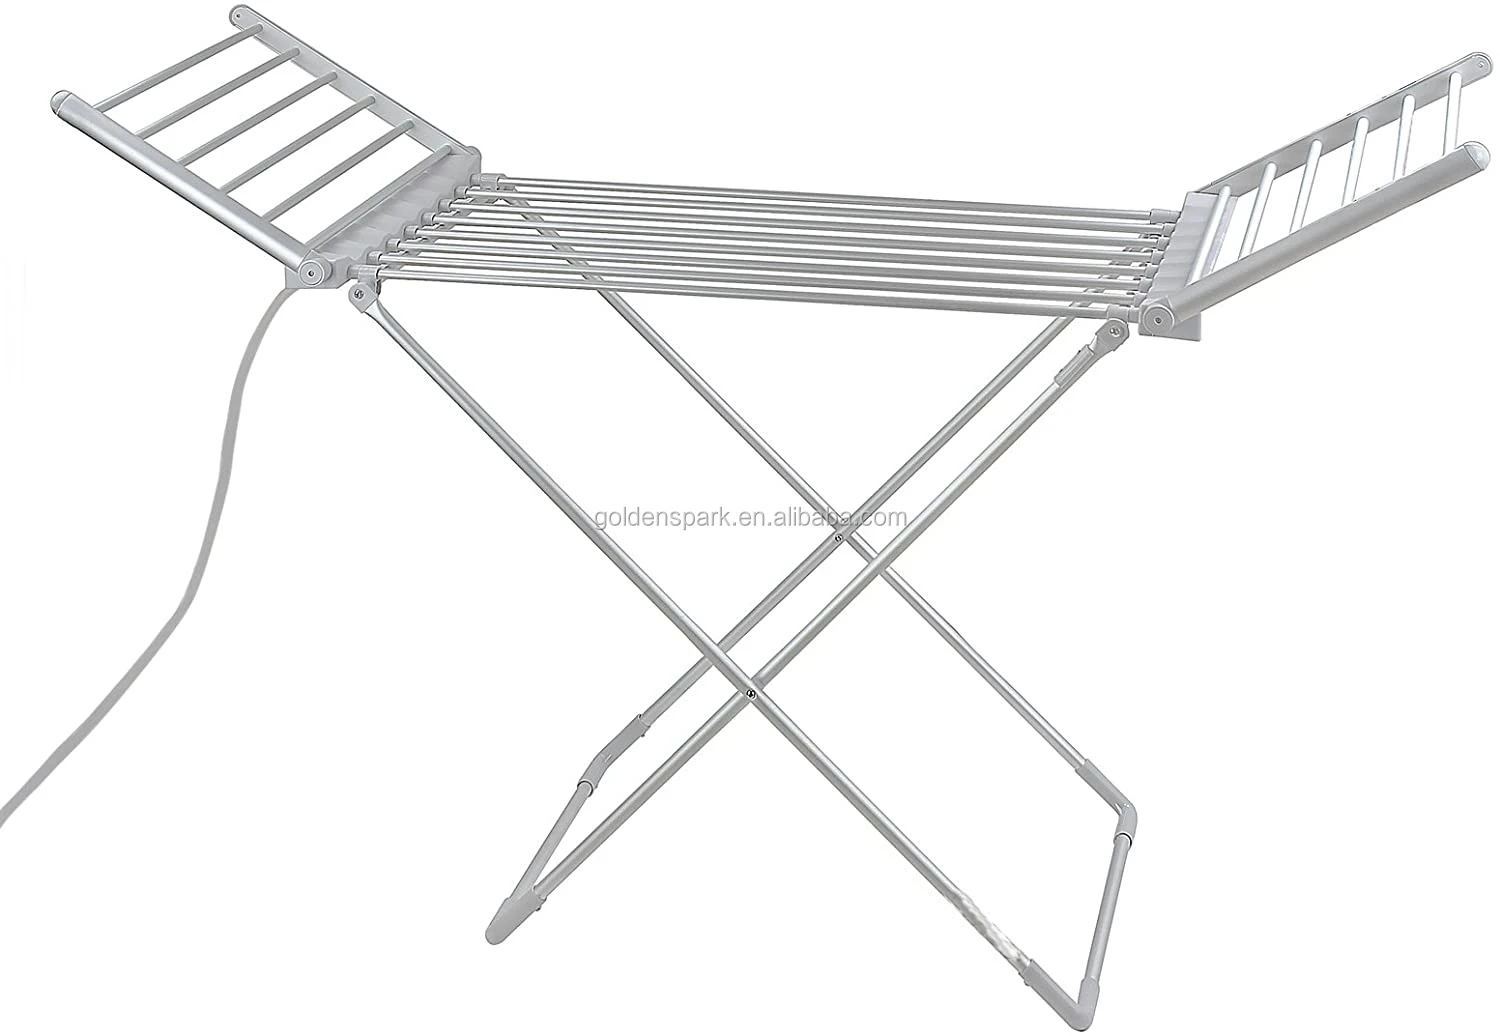 Silver DKK 230 Electric Heated Clothes Dryer Folding Energy-Efficient Indoor Airer Wet Laundry Drying Horse Rack 